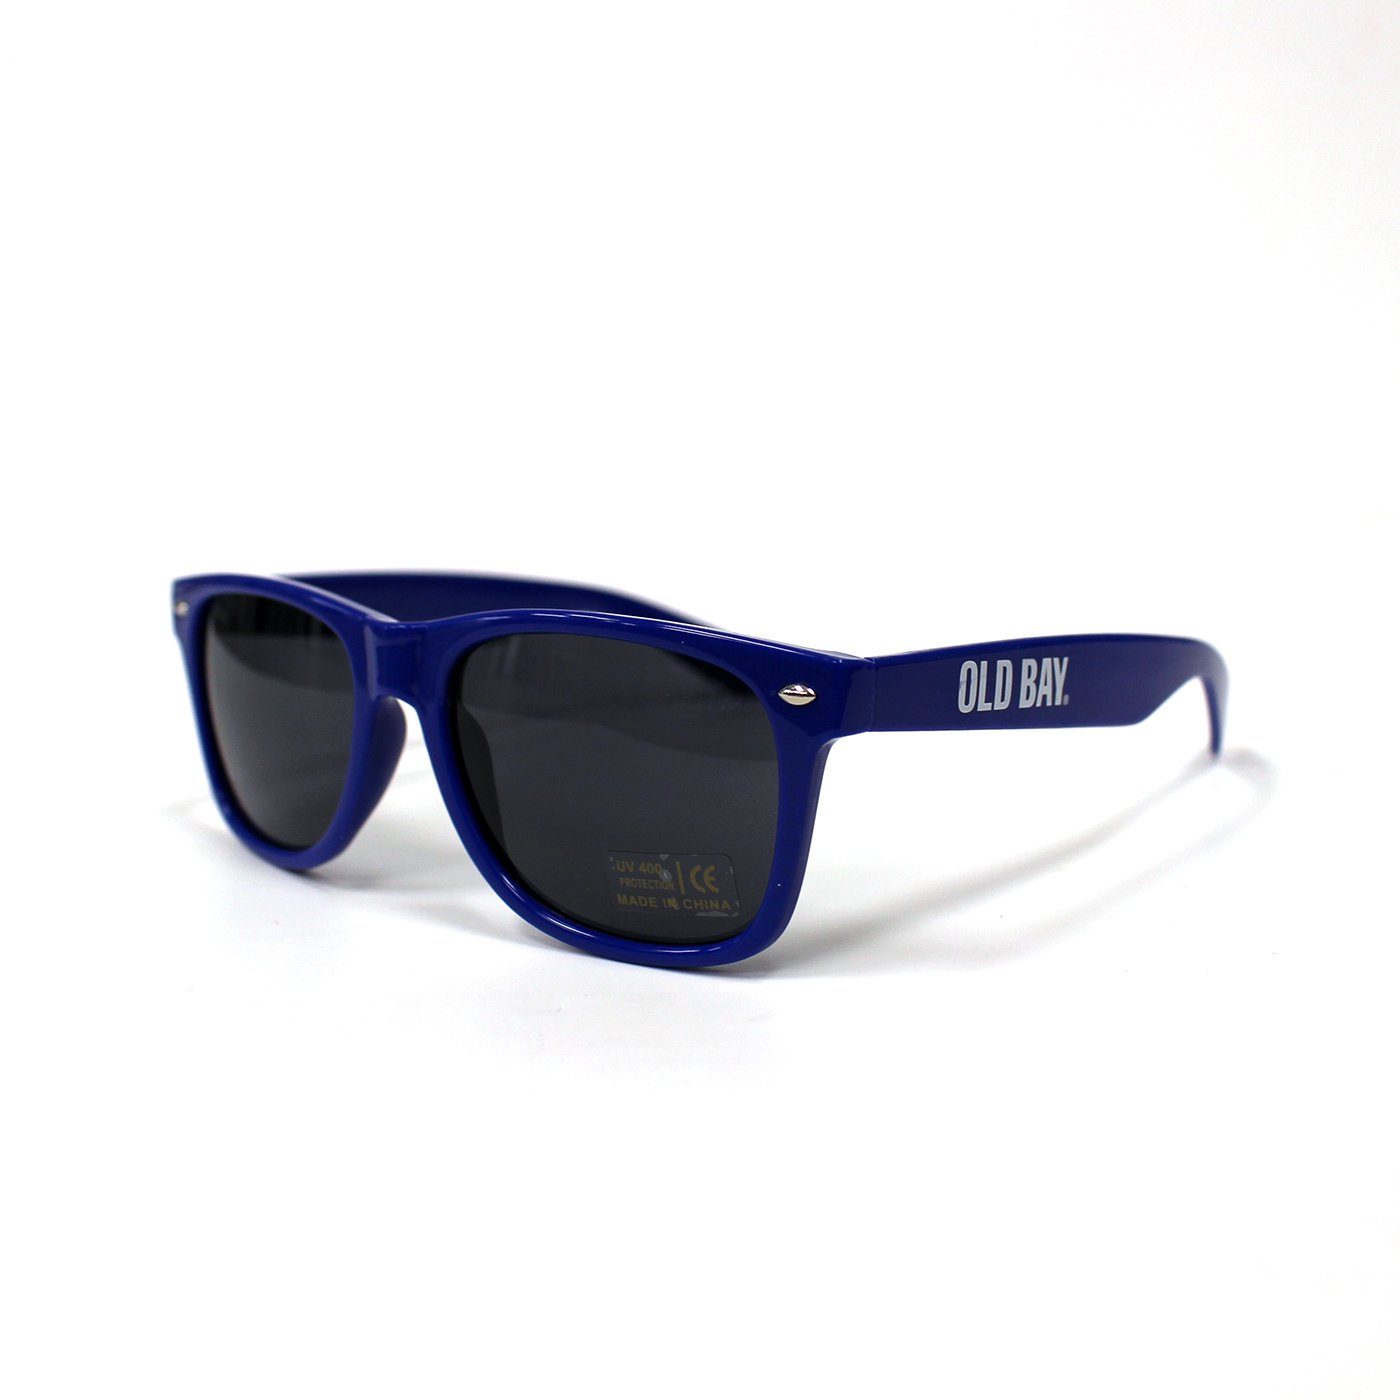 Old Bay with Plates / Shades - Route One Apparel